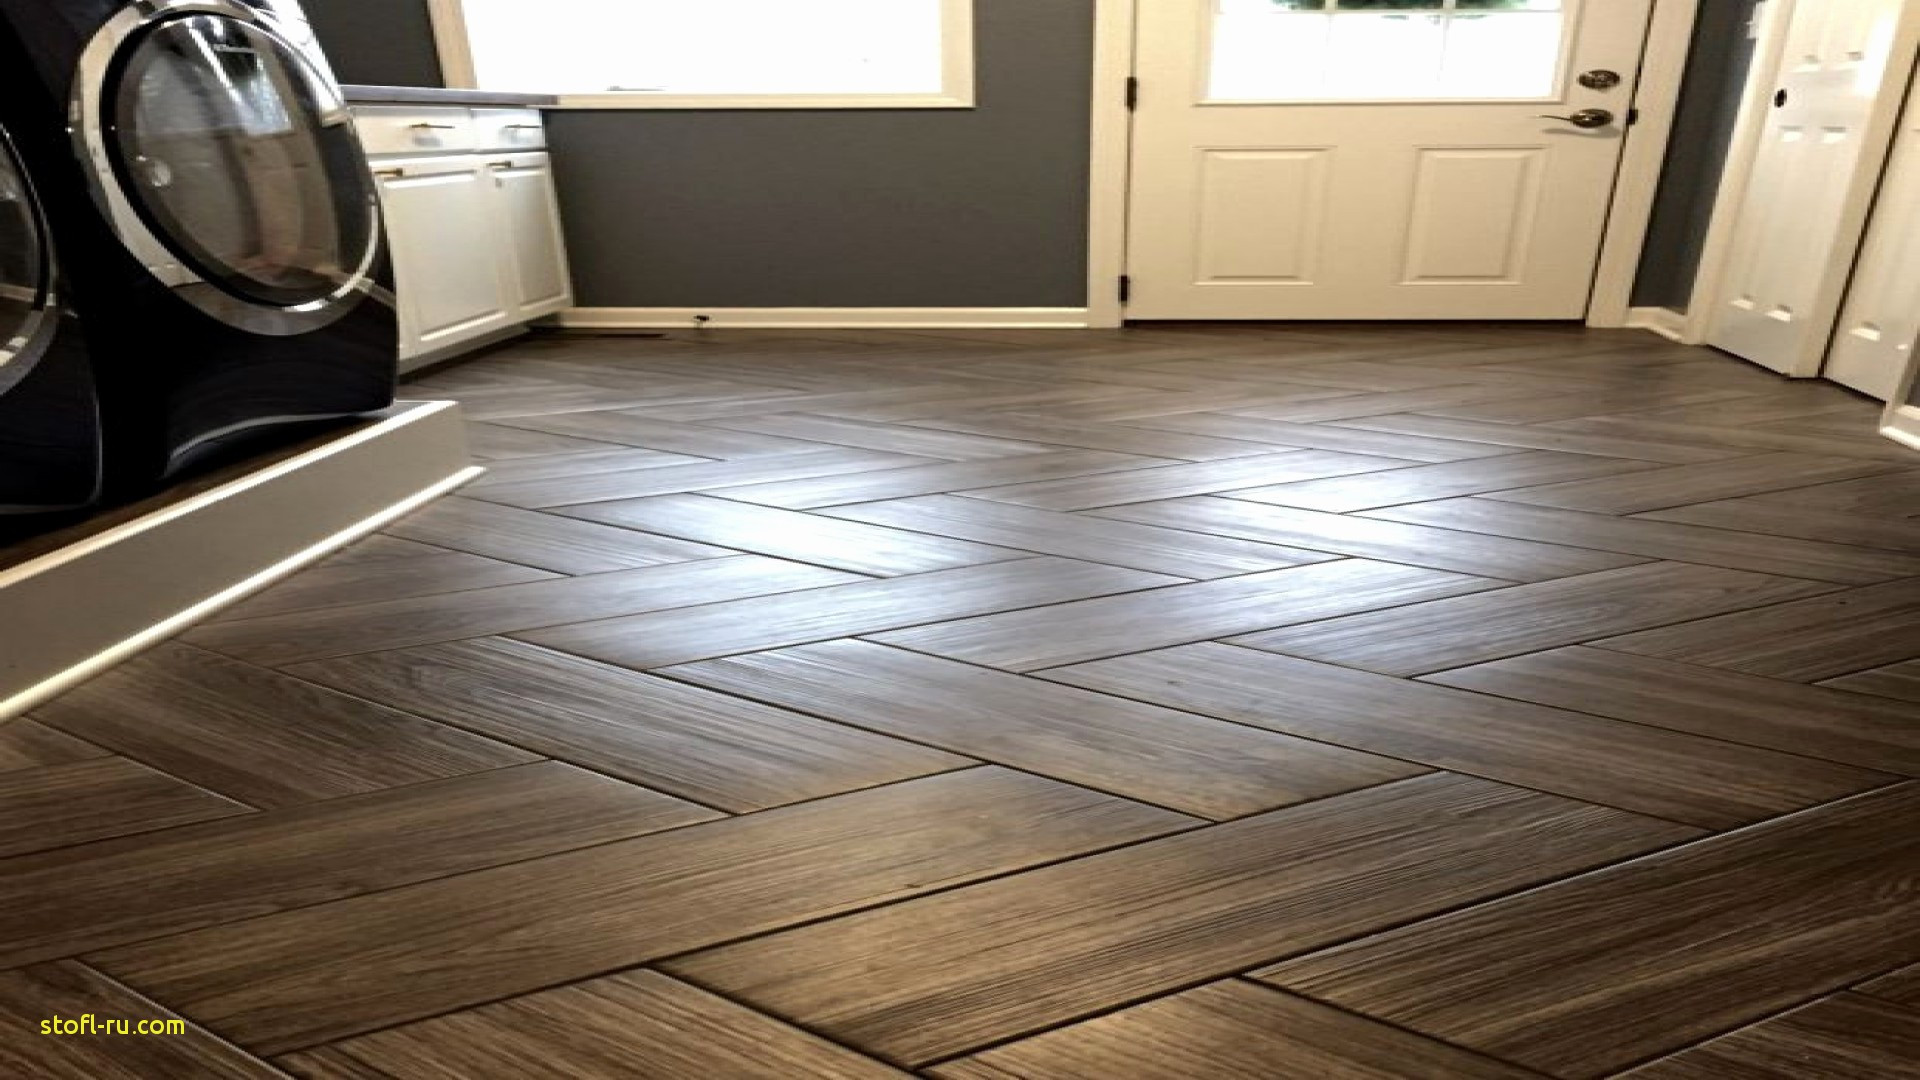 26 Awesome Hardwood Flooring Prices Per Square Foot Home Depot 2024 free download hardwood flooring prices per square foot home depot of home depot floor tile designs modern style house design ideas for kitchen floor tiles home depot elegant s media cache ak0 pinimg 736x 